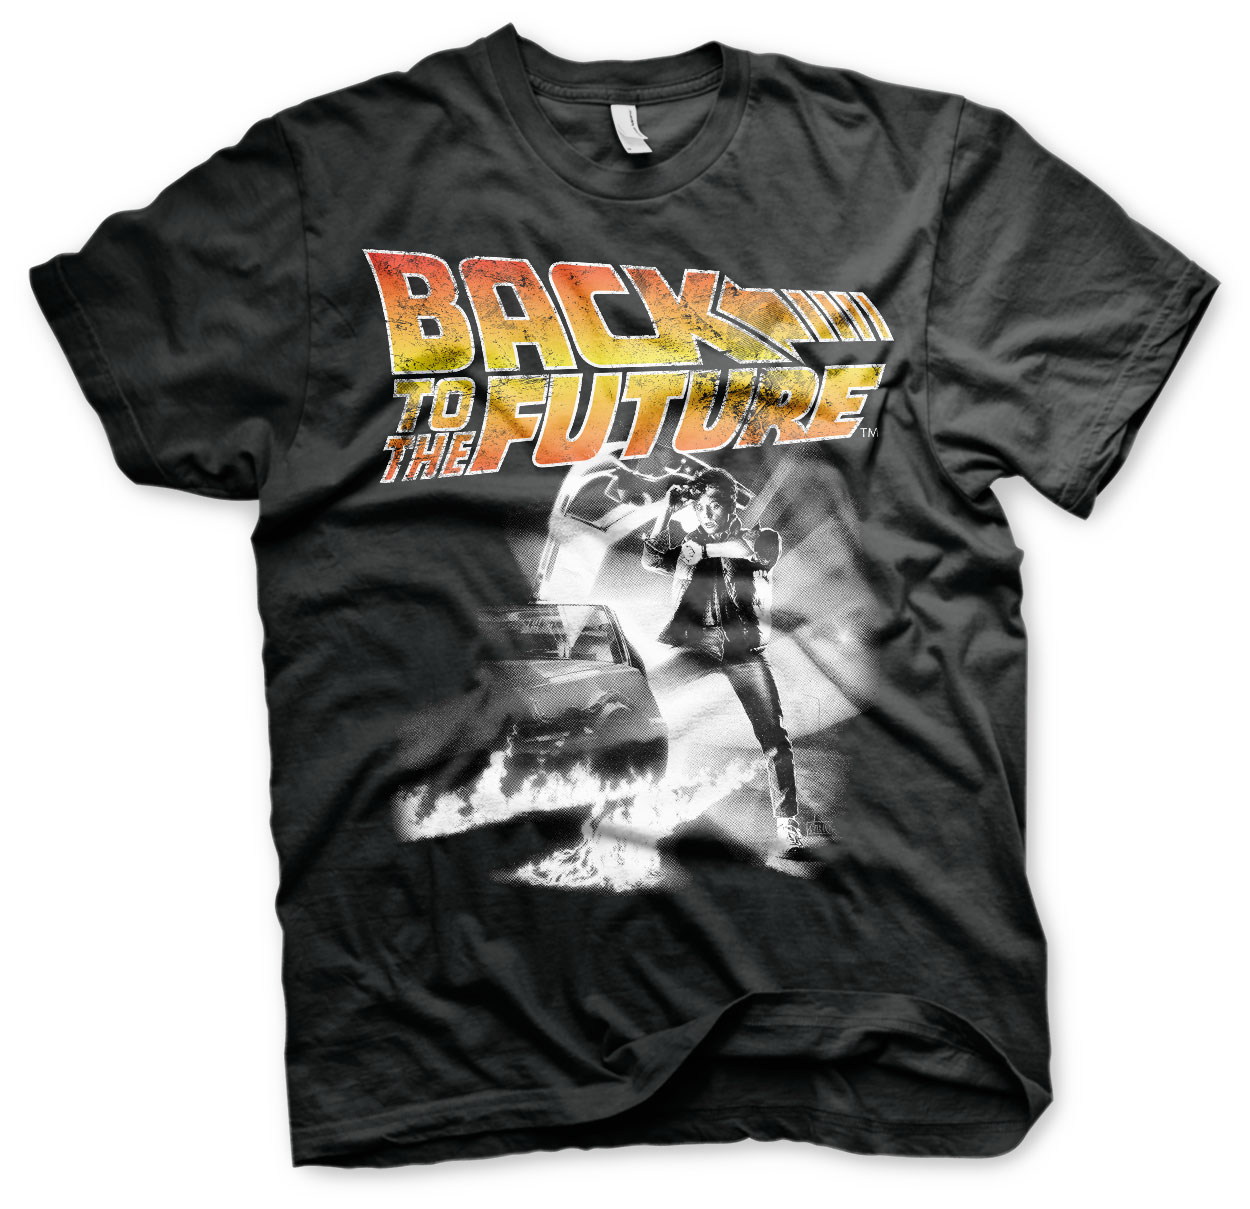 BACK TO THE FUTURE: Poster T-Shirt (Black)